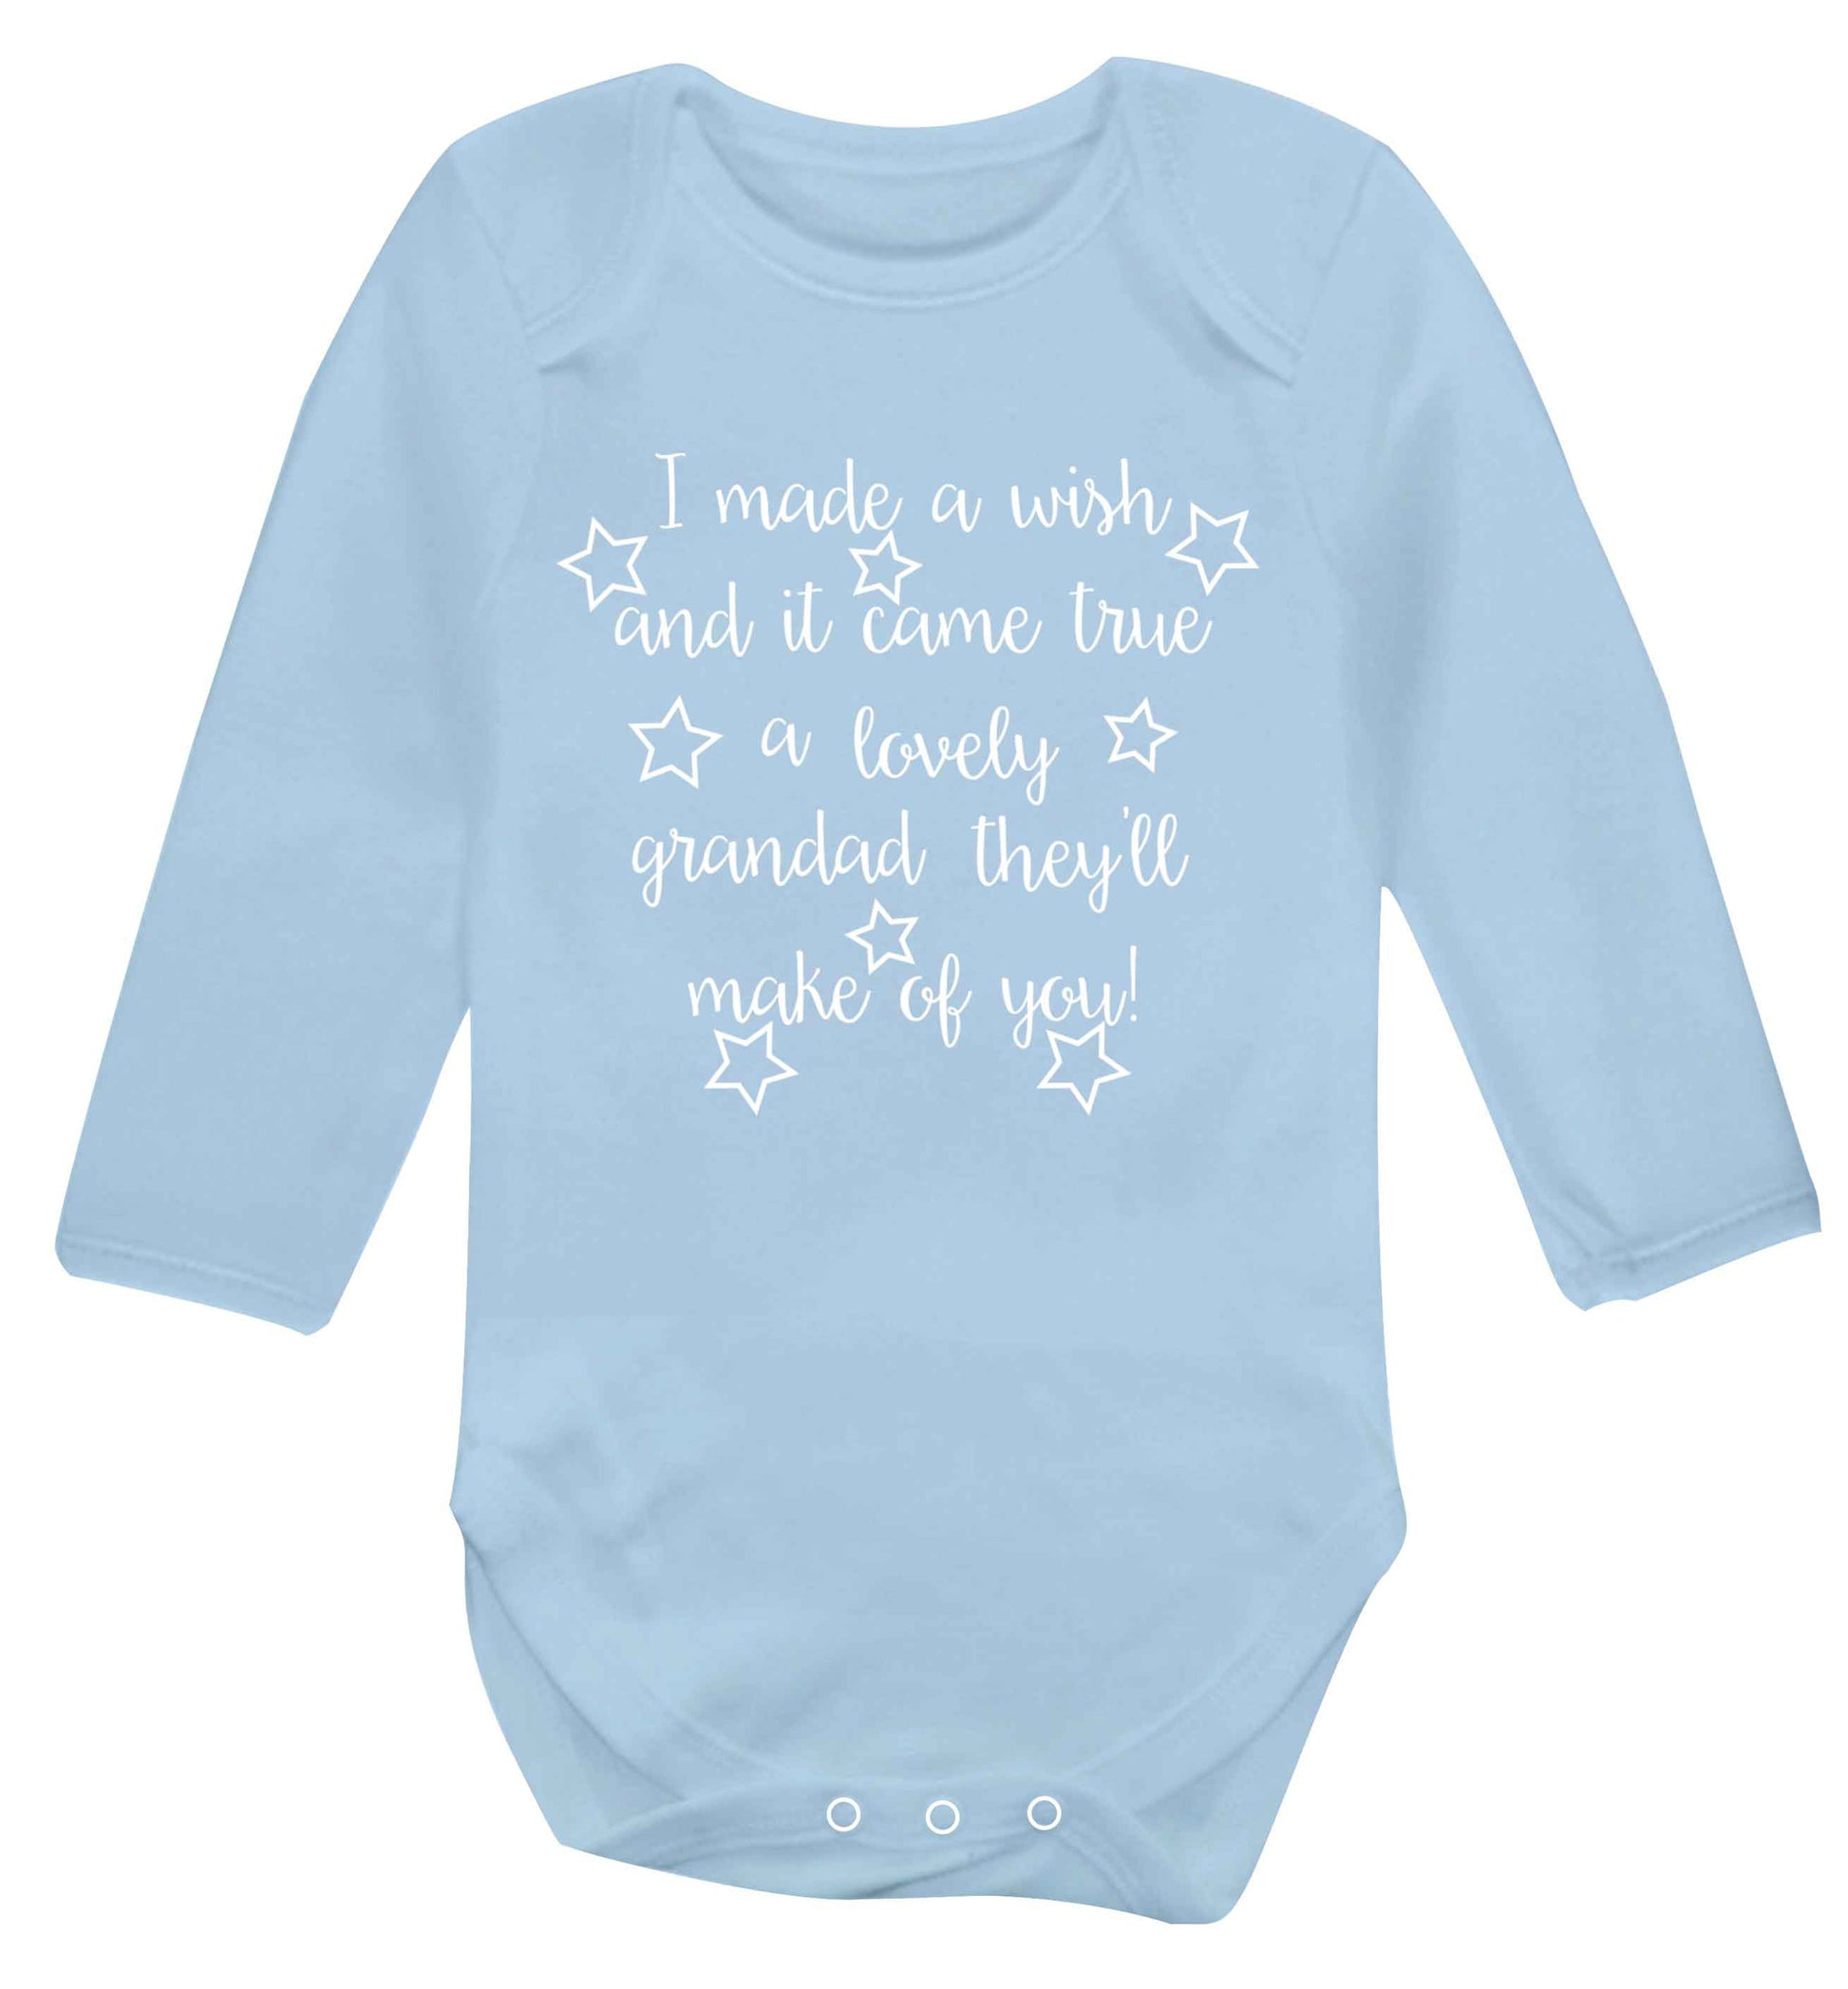 I made a wish and it came true a lovely grandad they'll make of you! Baby Vest long sleeved pale blue 6-12 months